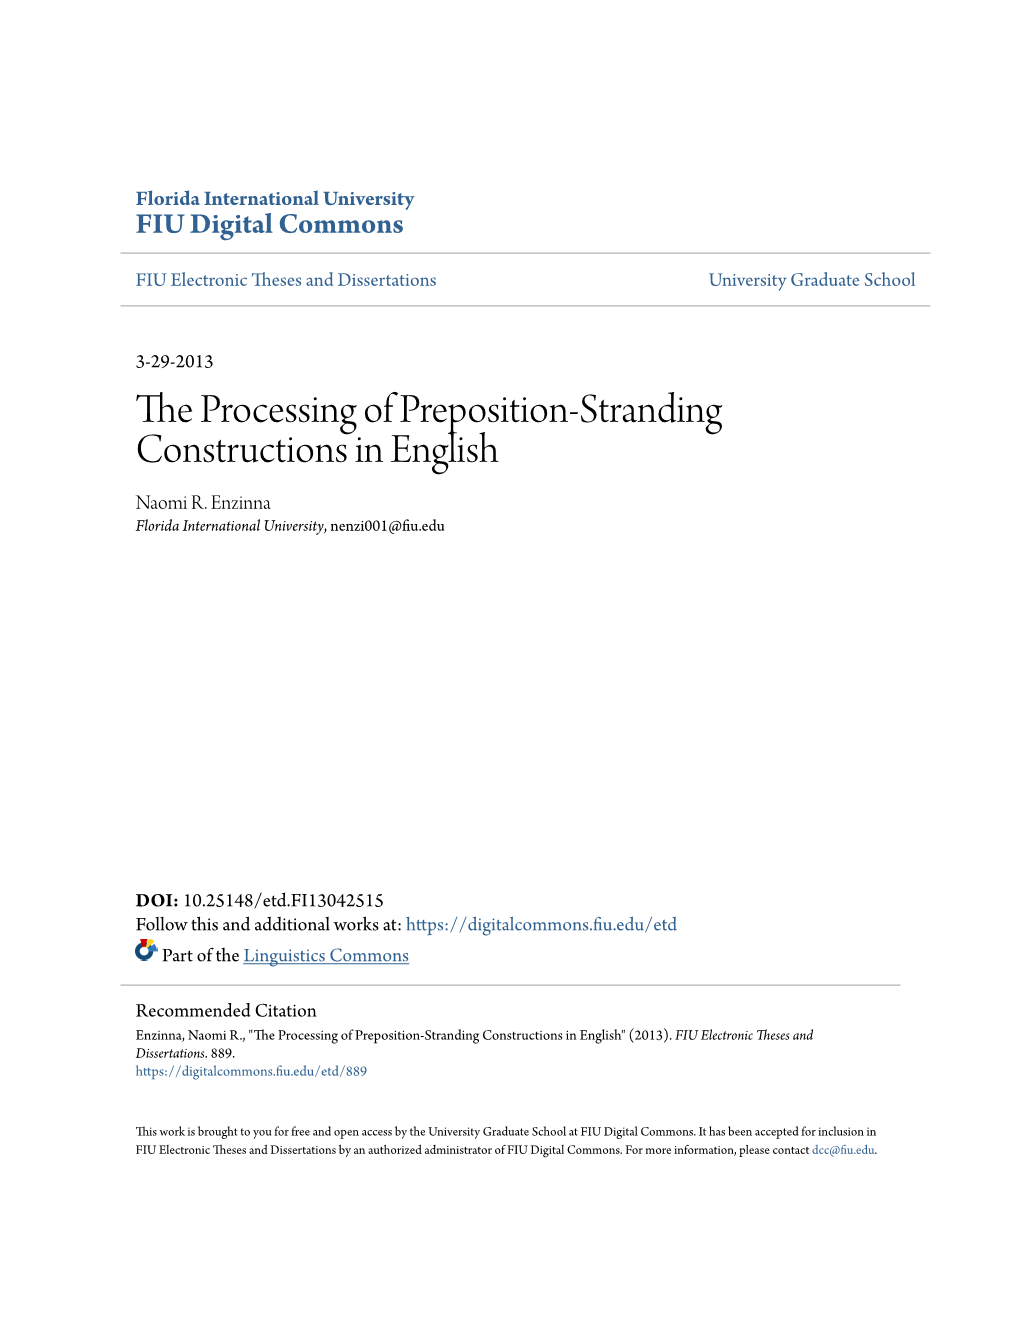 The Processing of Preposition-Stranding Constructions